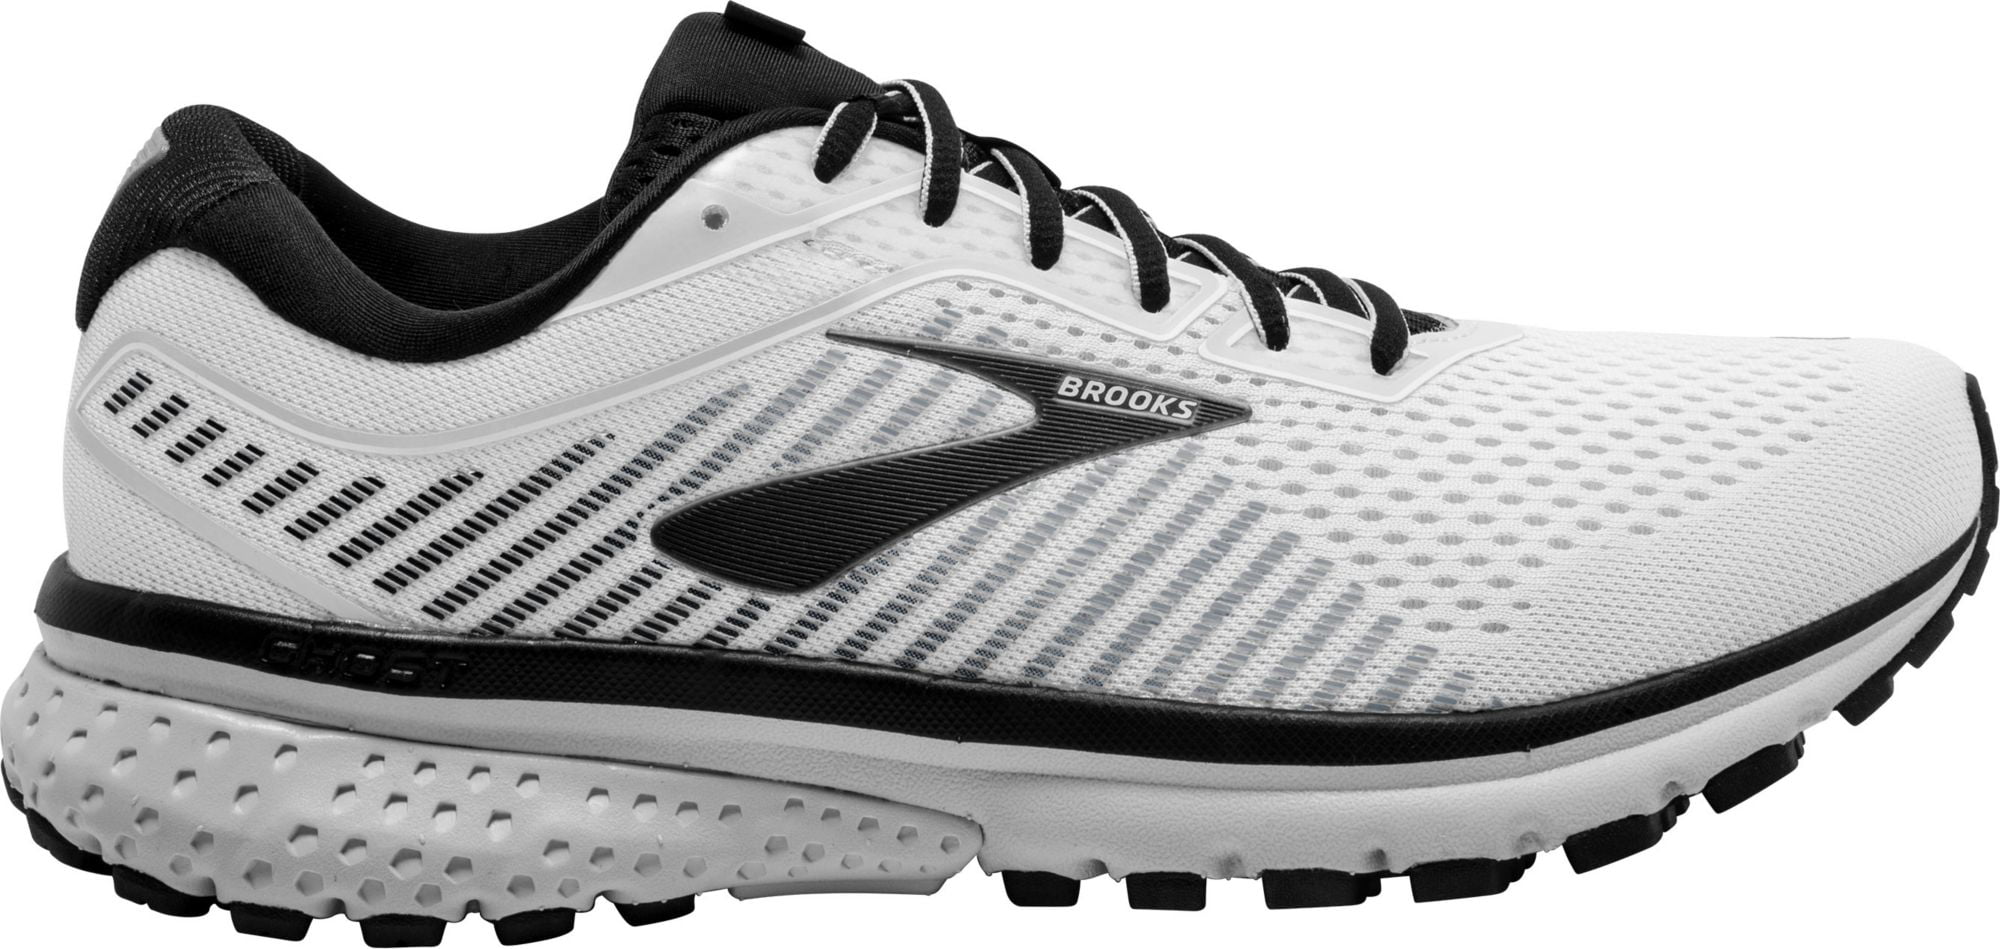 men's brooks ghost shoes